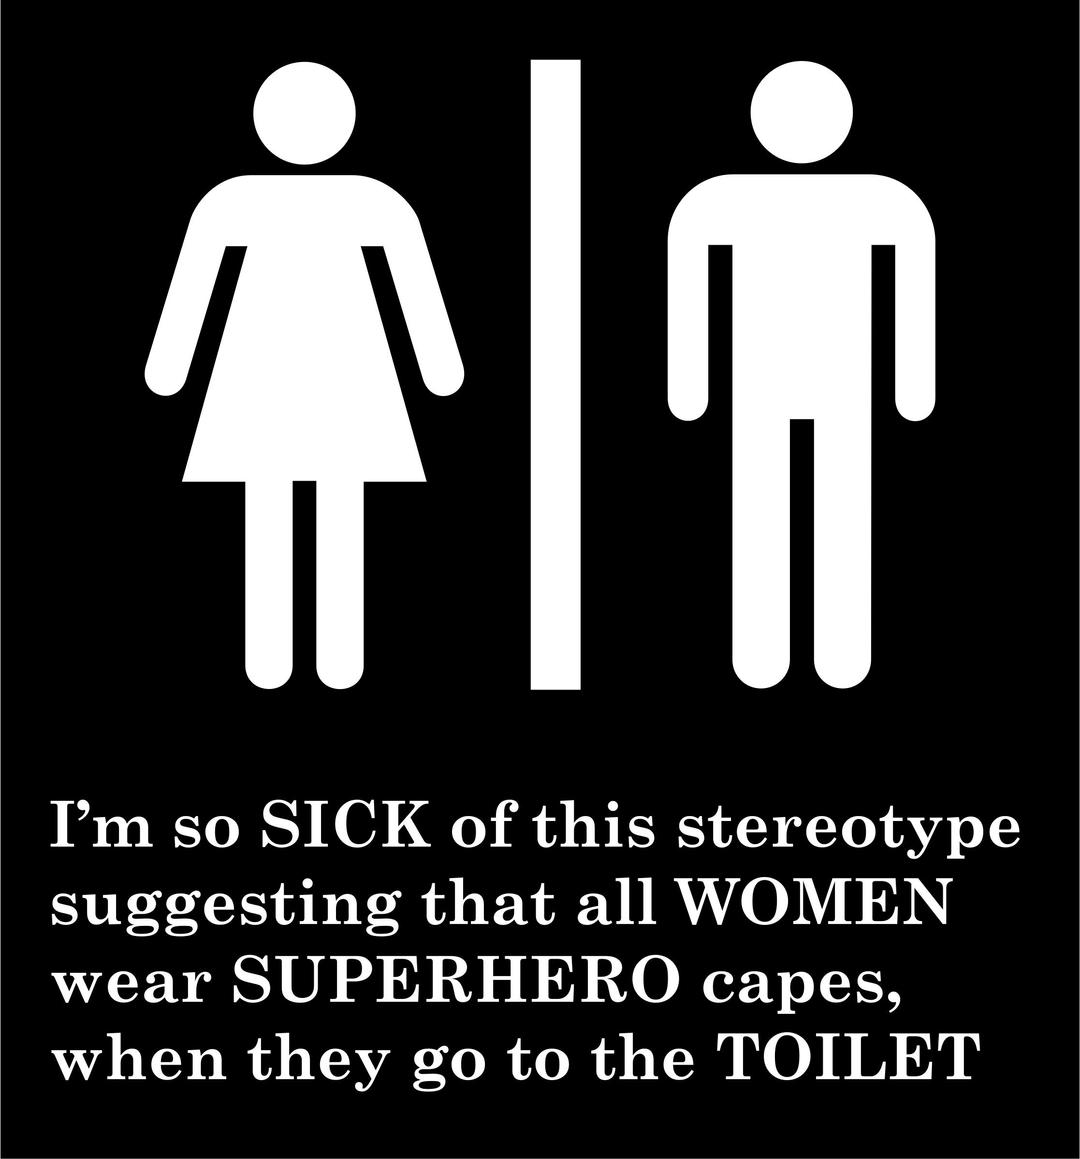 Bathroom Sign Stereotype, by GDJ png transparent